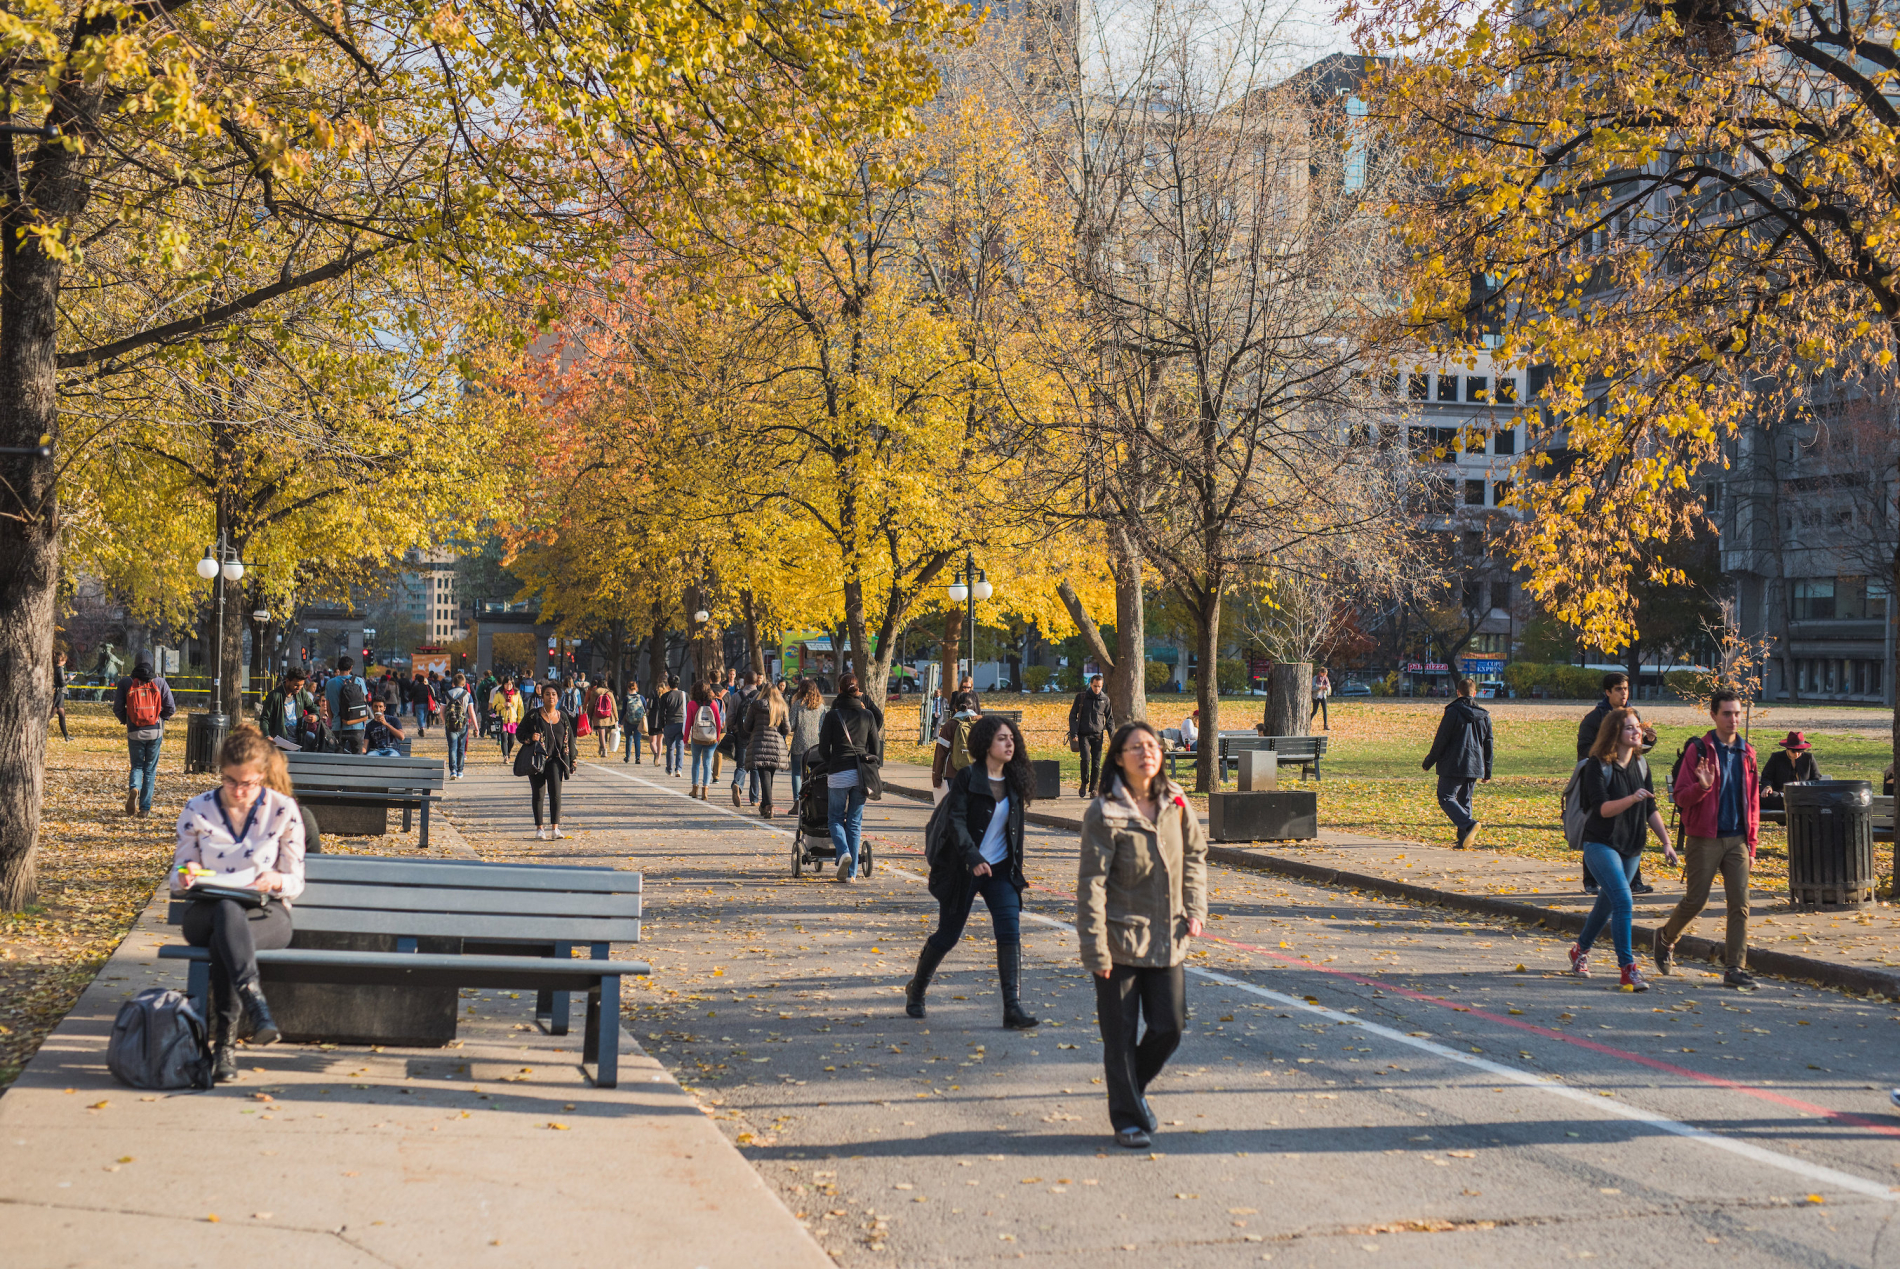 Students walking on campus in the Fall